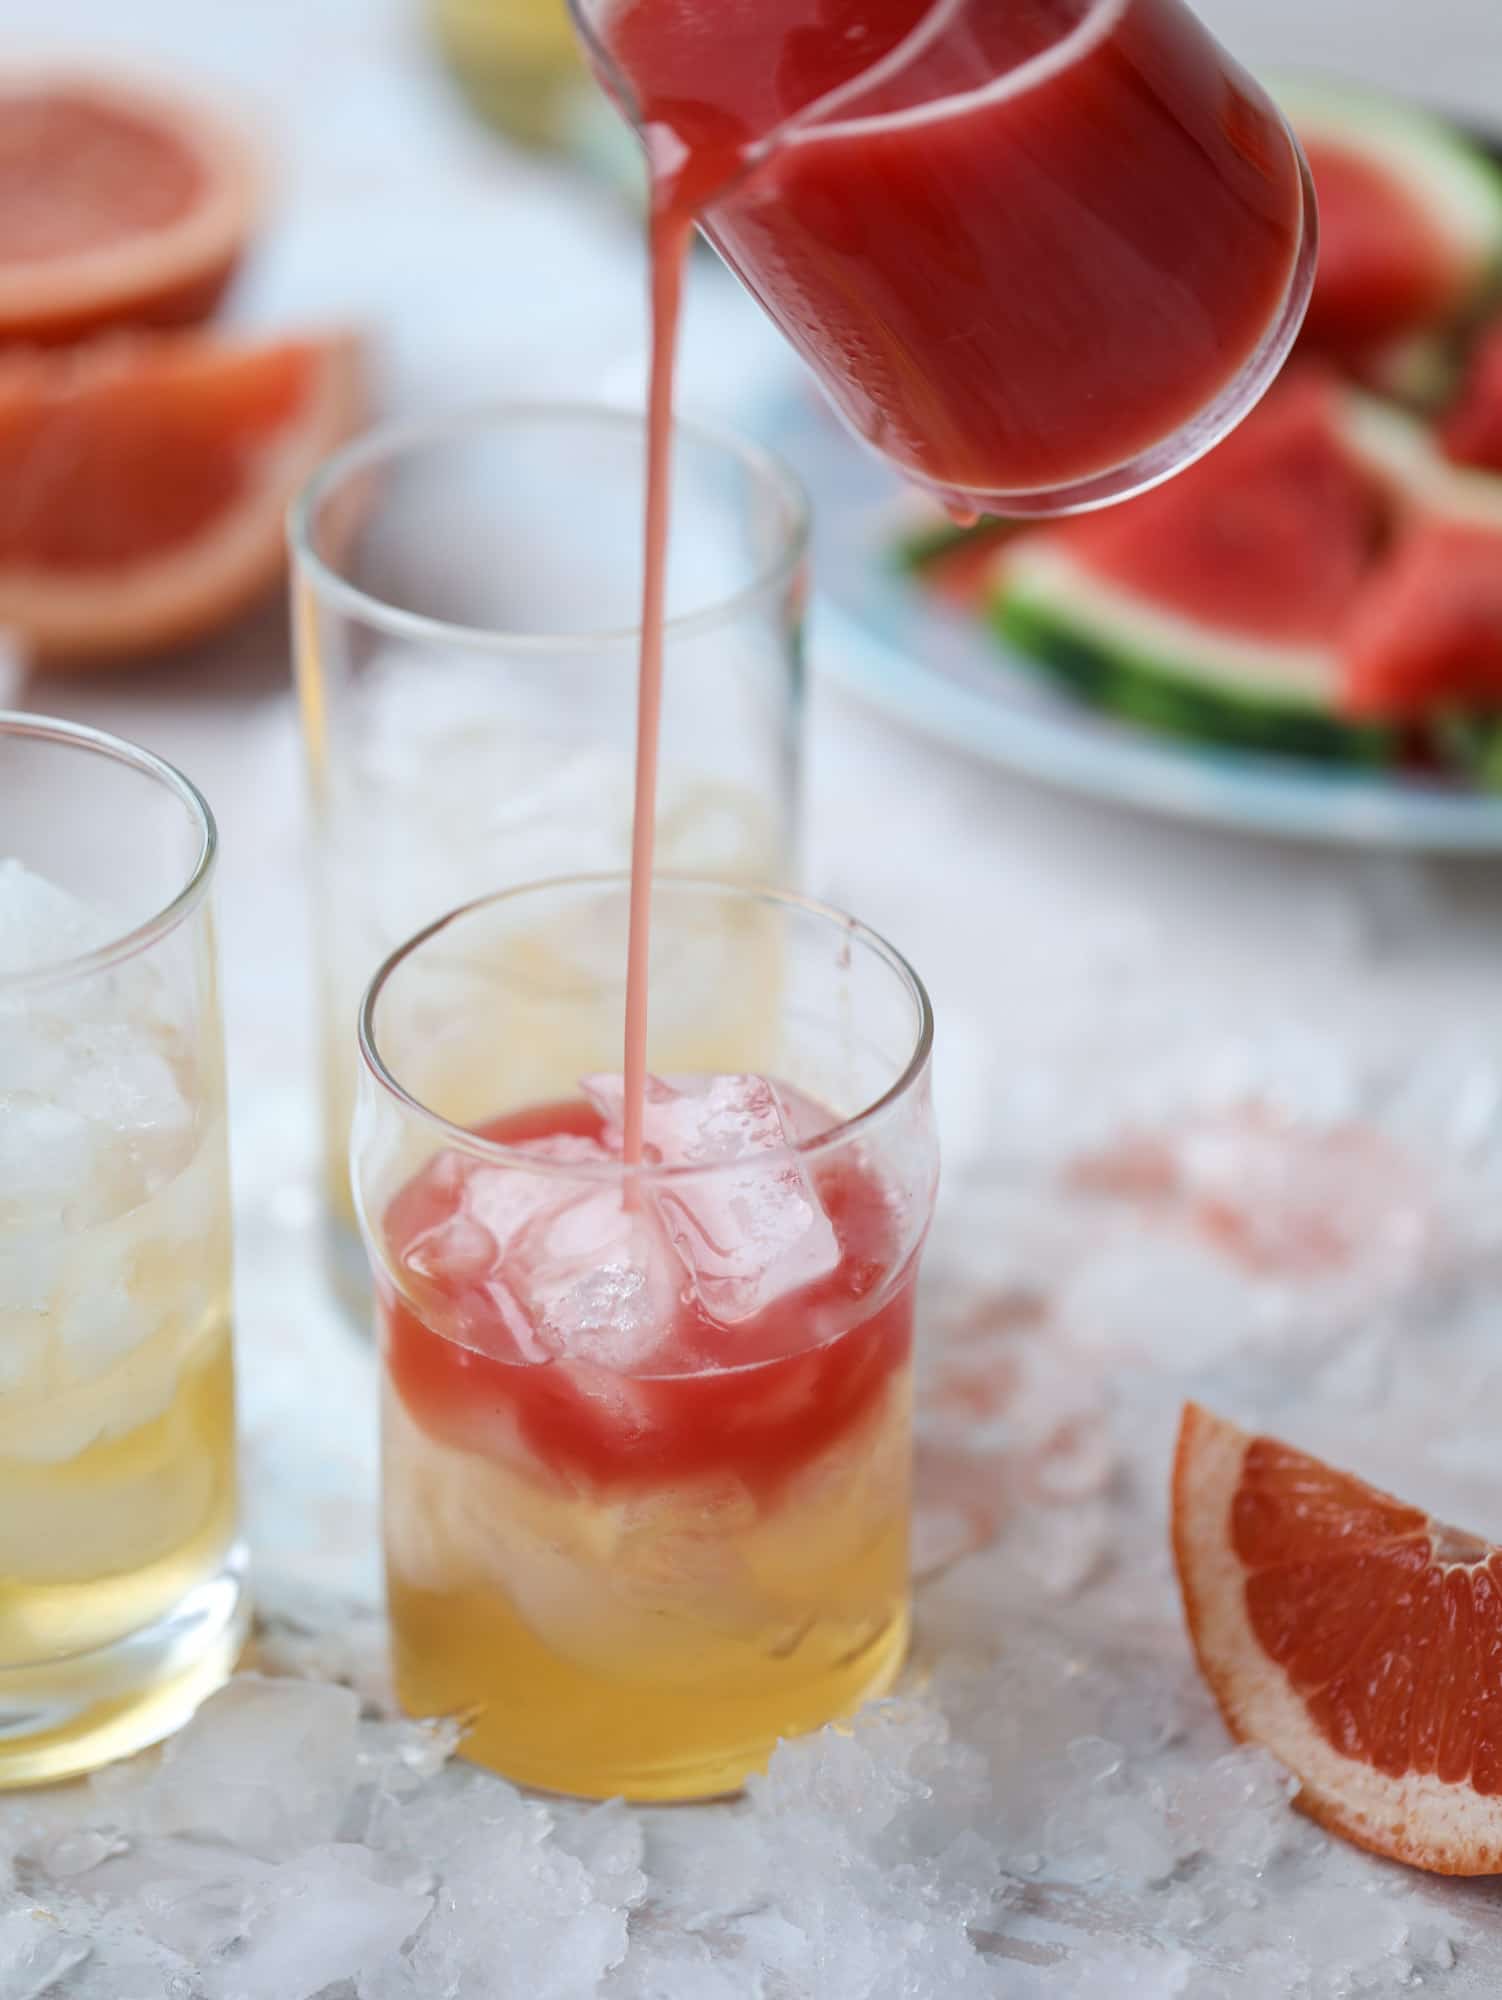 This watermelon grapefruit paloma cocktail is a summertime dream! Grapefruit syrup is super easy to make and when it's combined with fresh watermelon juice and tequila... oooh! Best happy hour ever. I howsweeteats.com #grapefruit #watermelon #paloma #cocktail #tequila